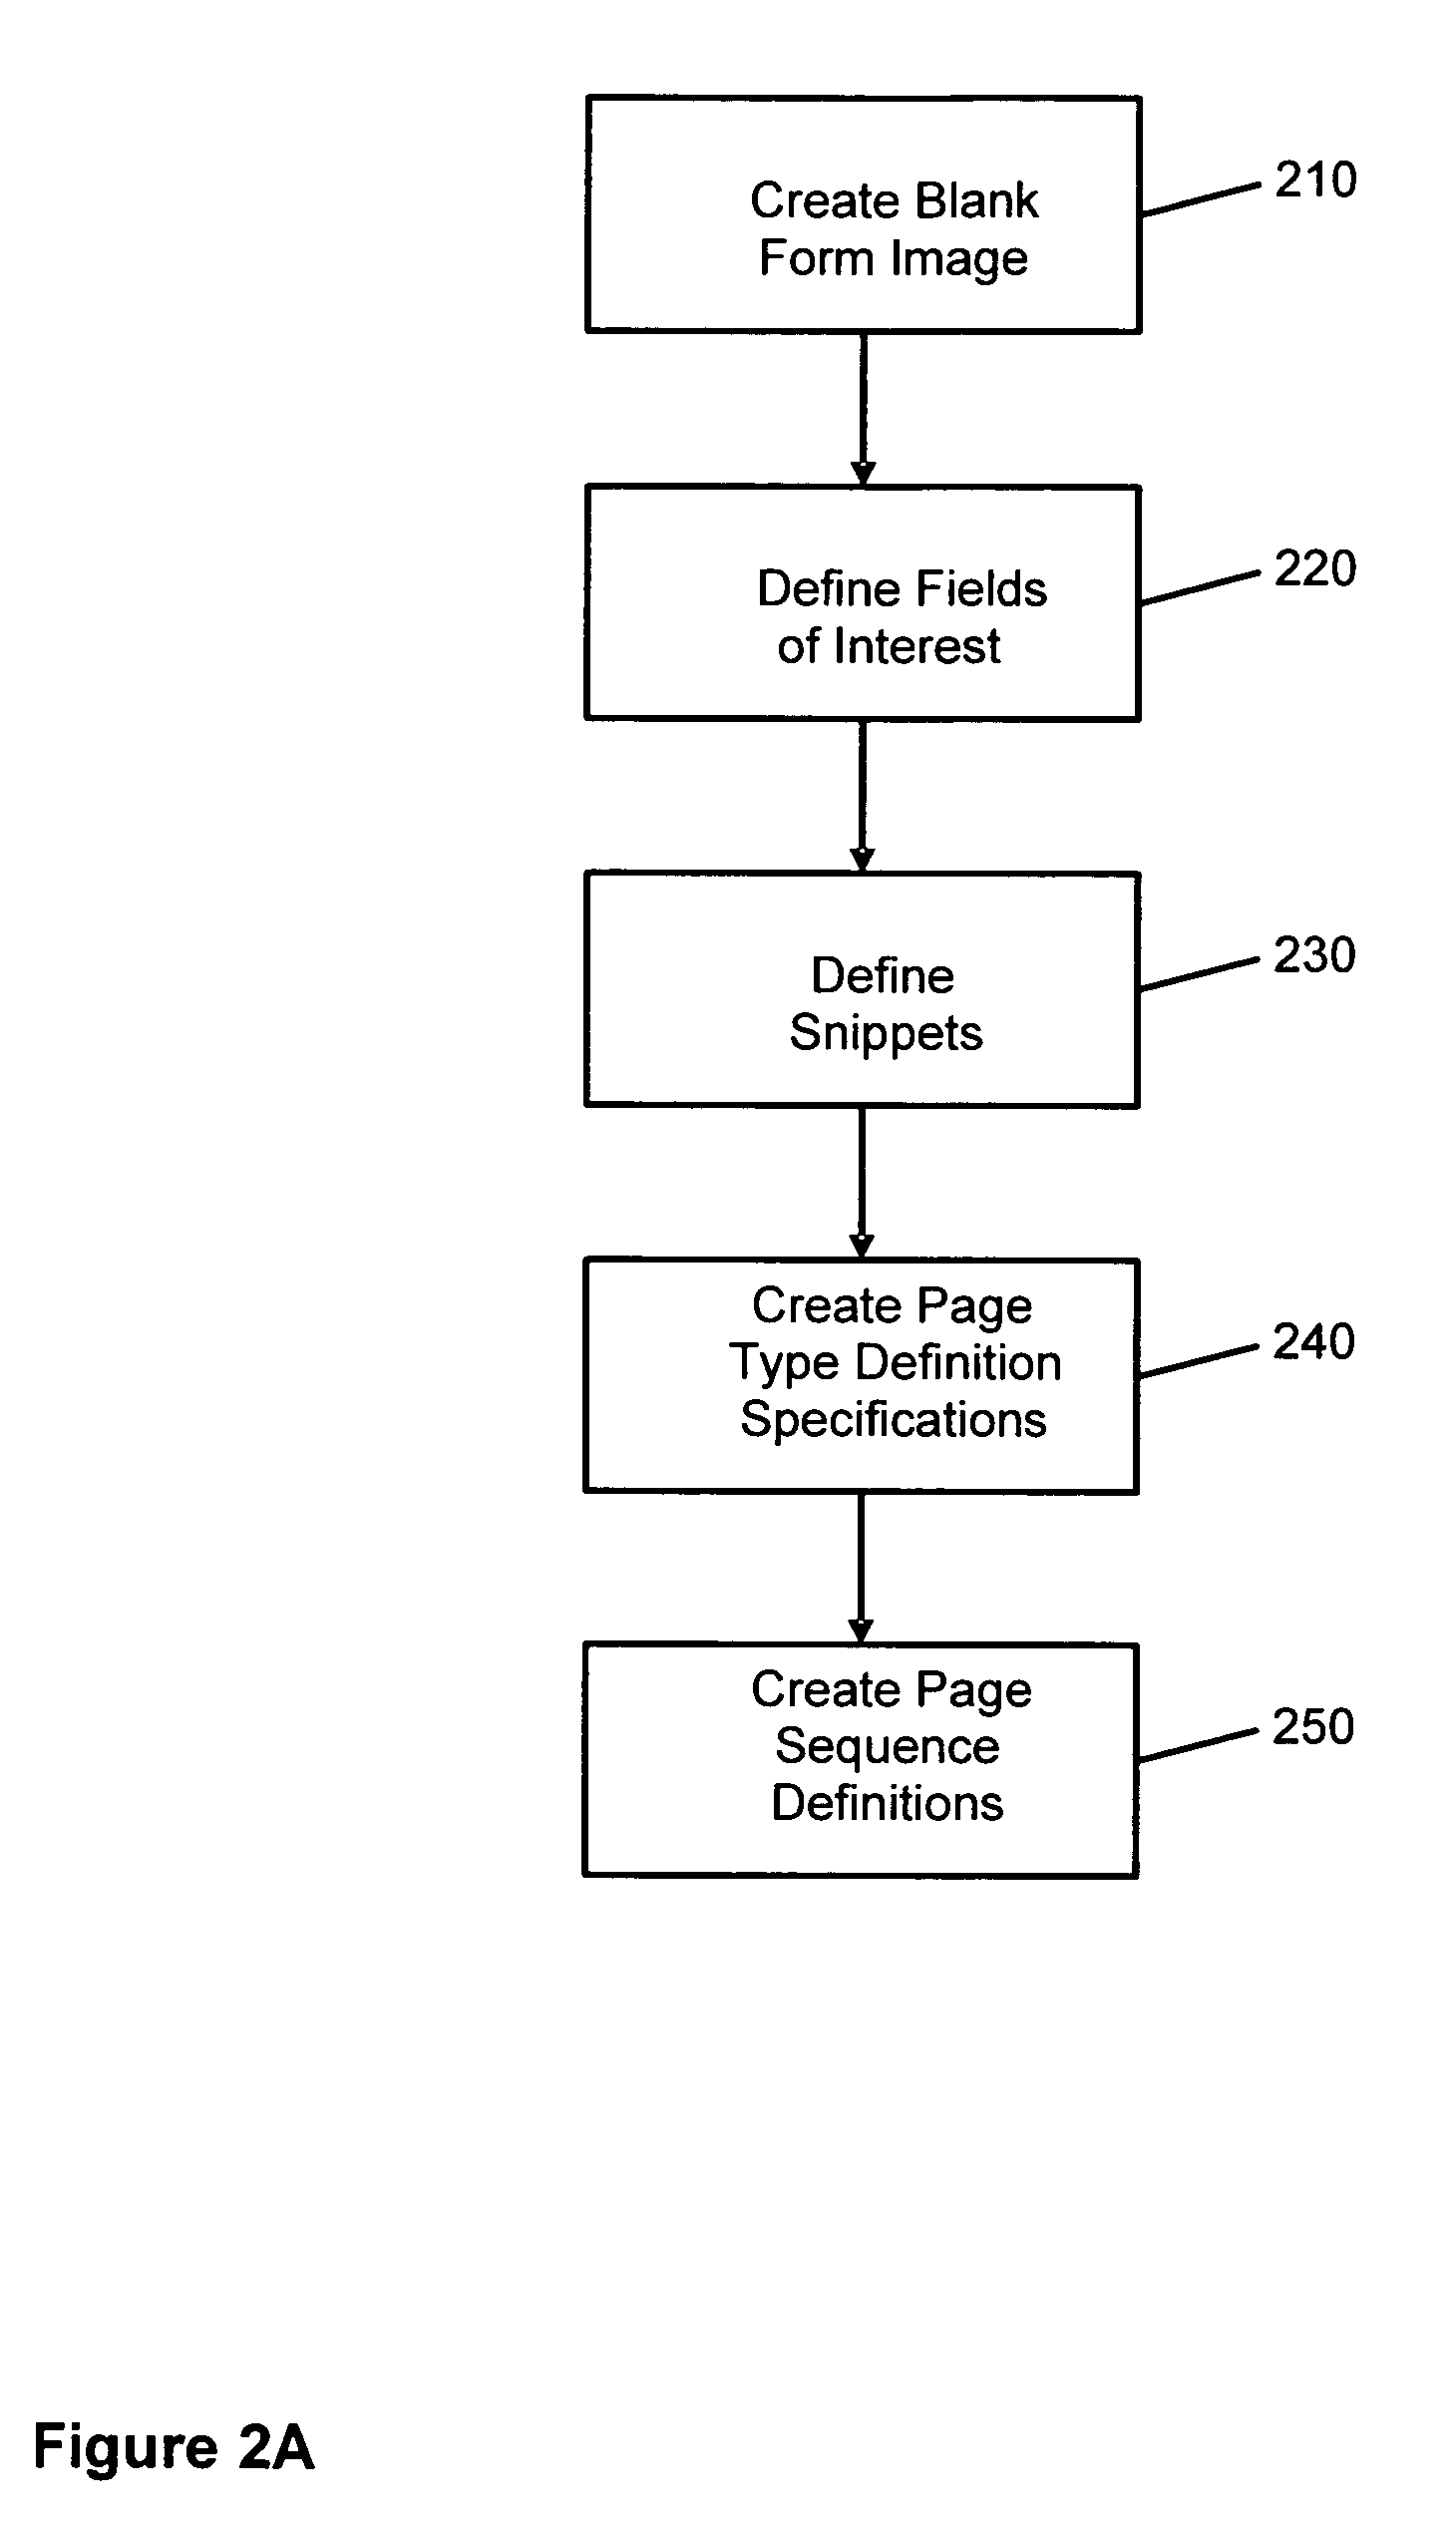 System and method for electronically processing document images